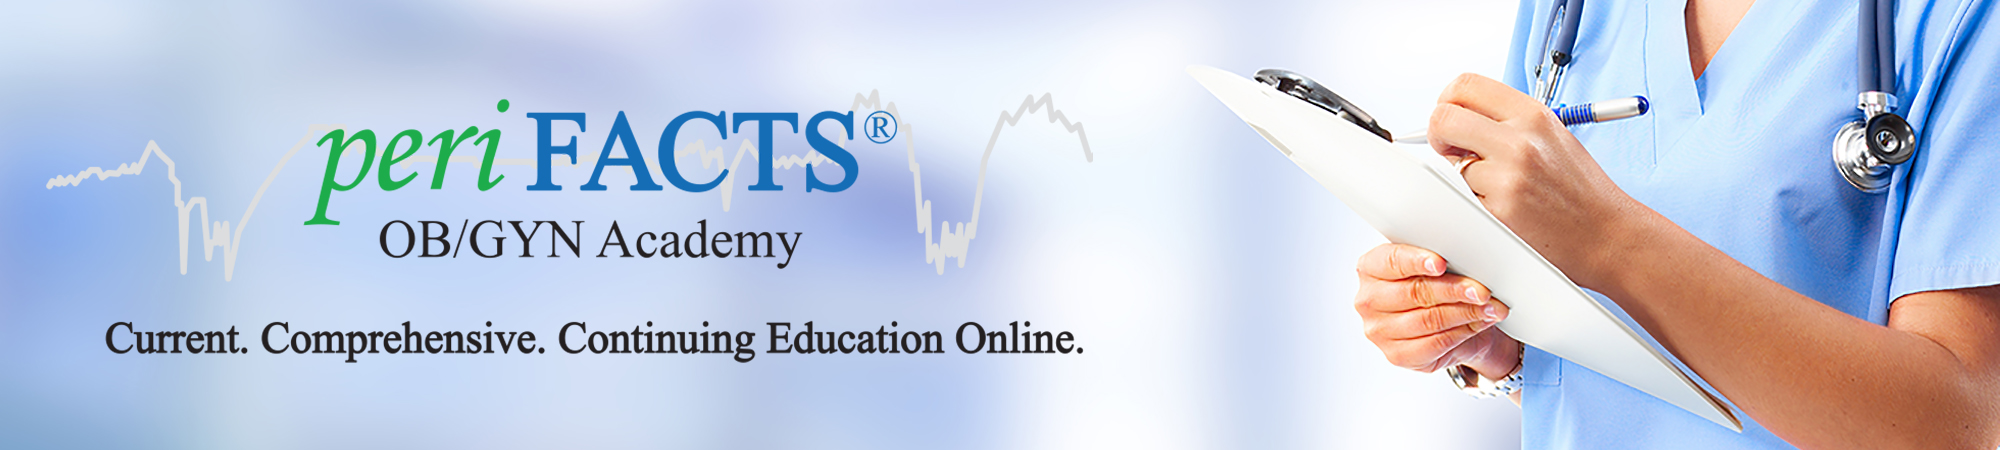 periFACTS OB/GYN Academy: Current. Comprehensive. Continuing Education Online.